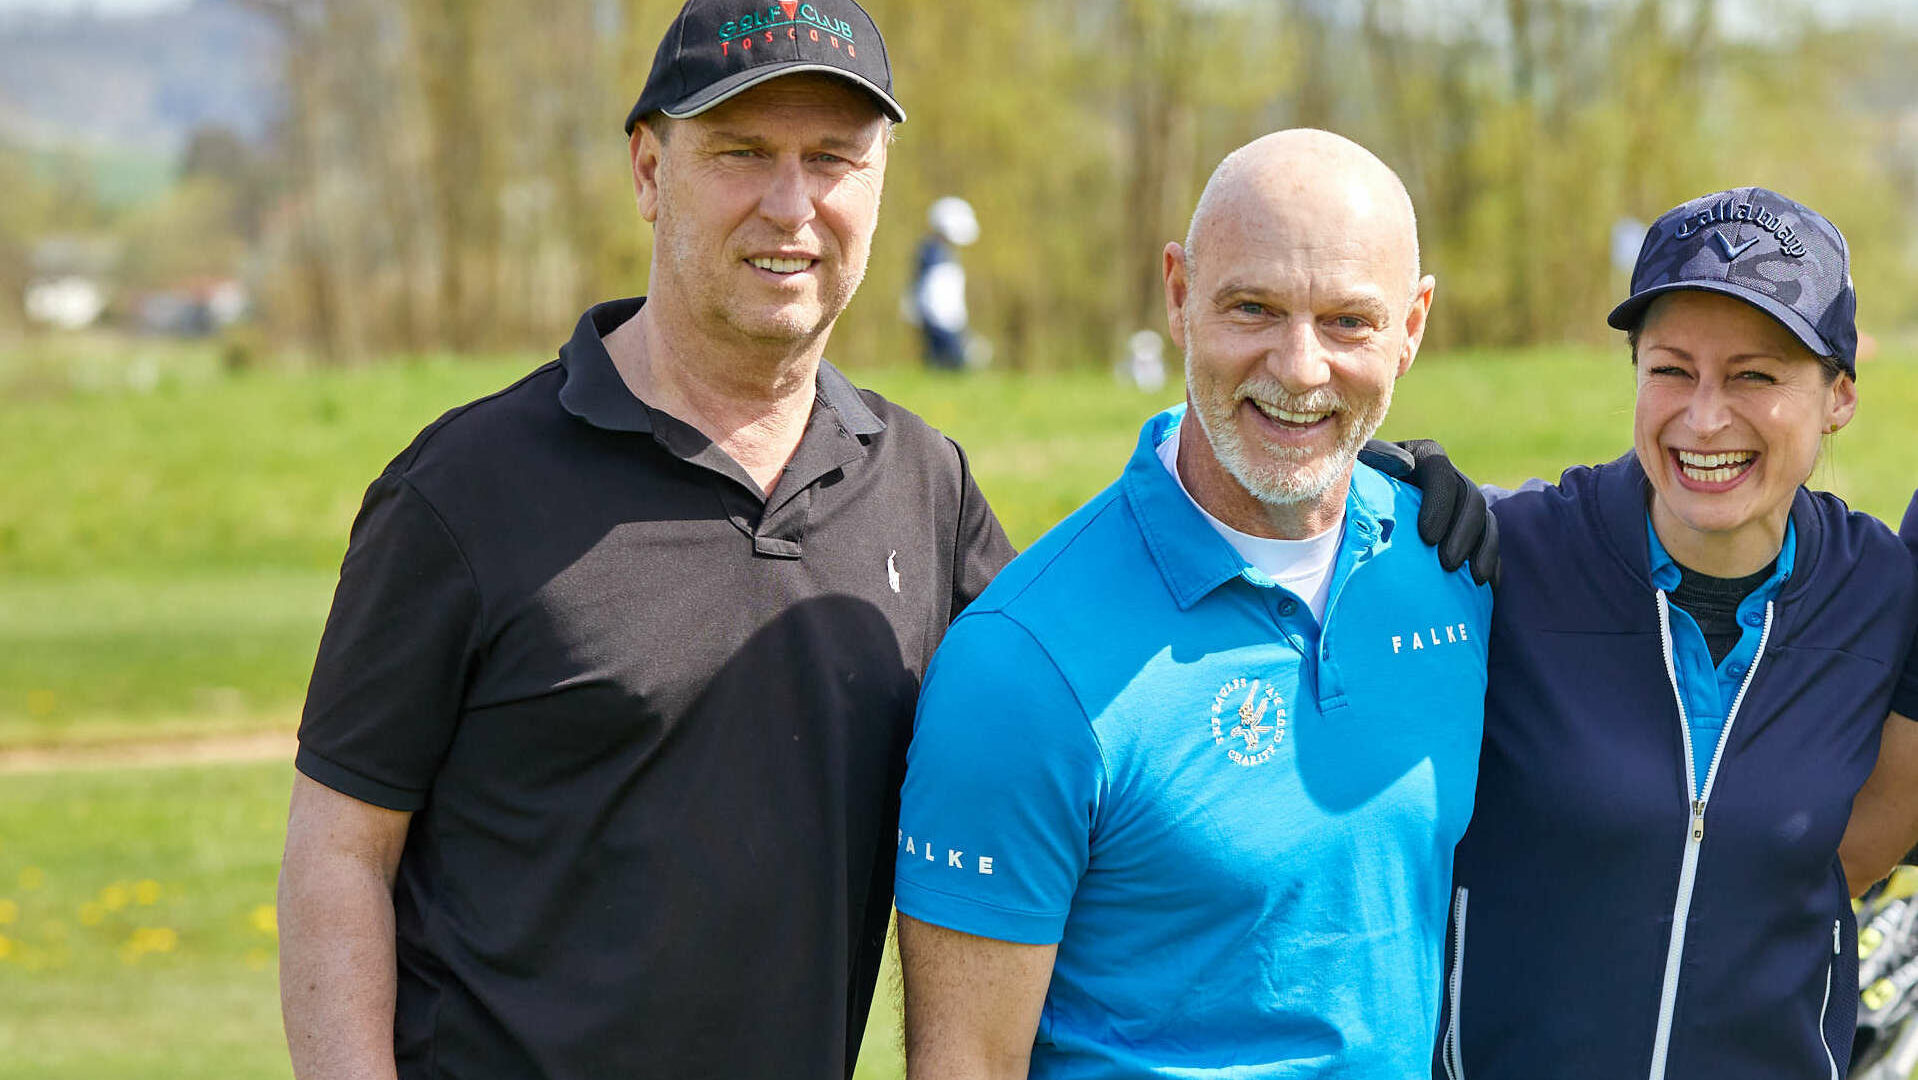 eagles charity gc Ingolfen 2023 bad griesbach